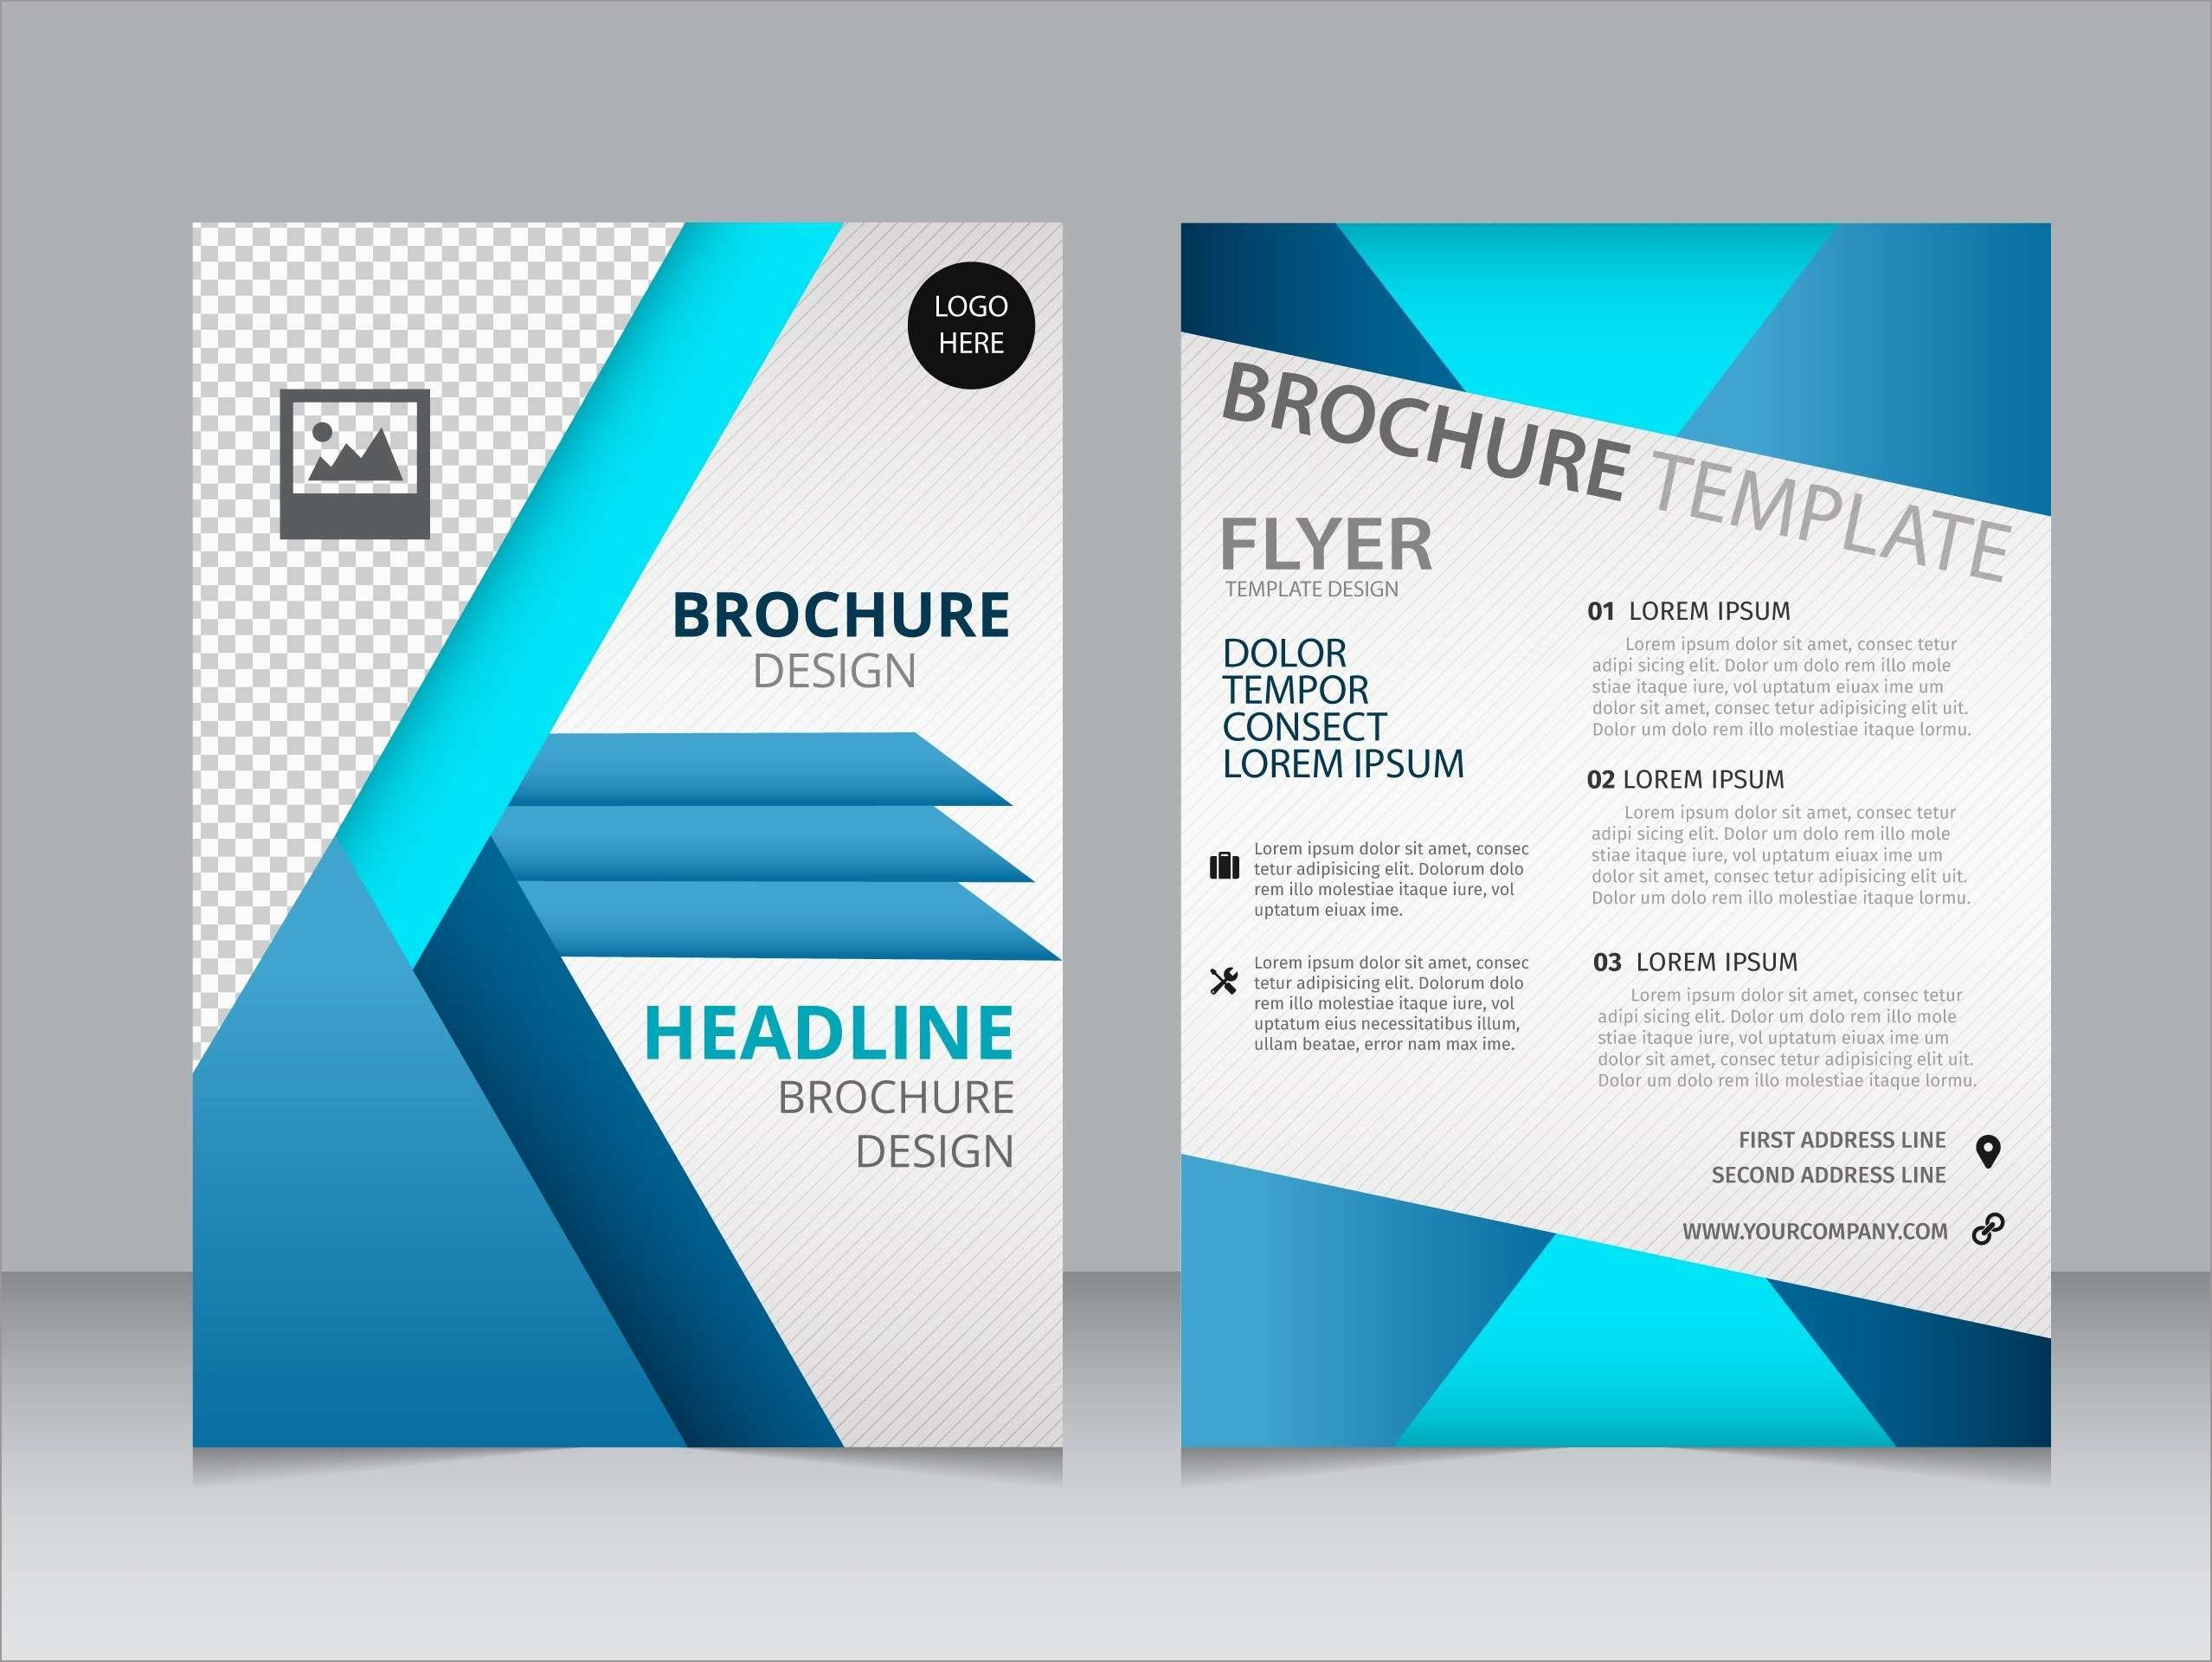 Awesome Template For Brochure Design Free Download  Best Of Template inside Free Brochure Template Downloads